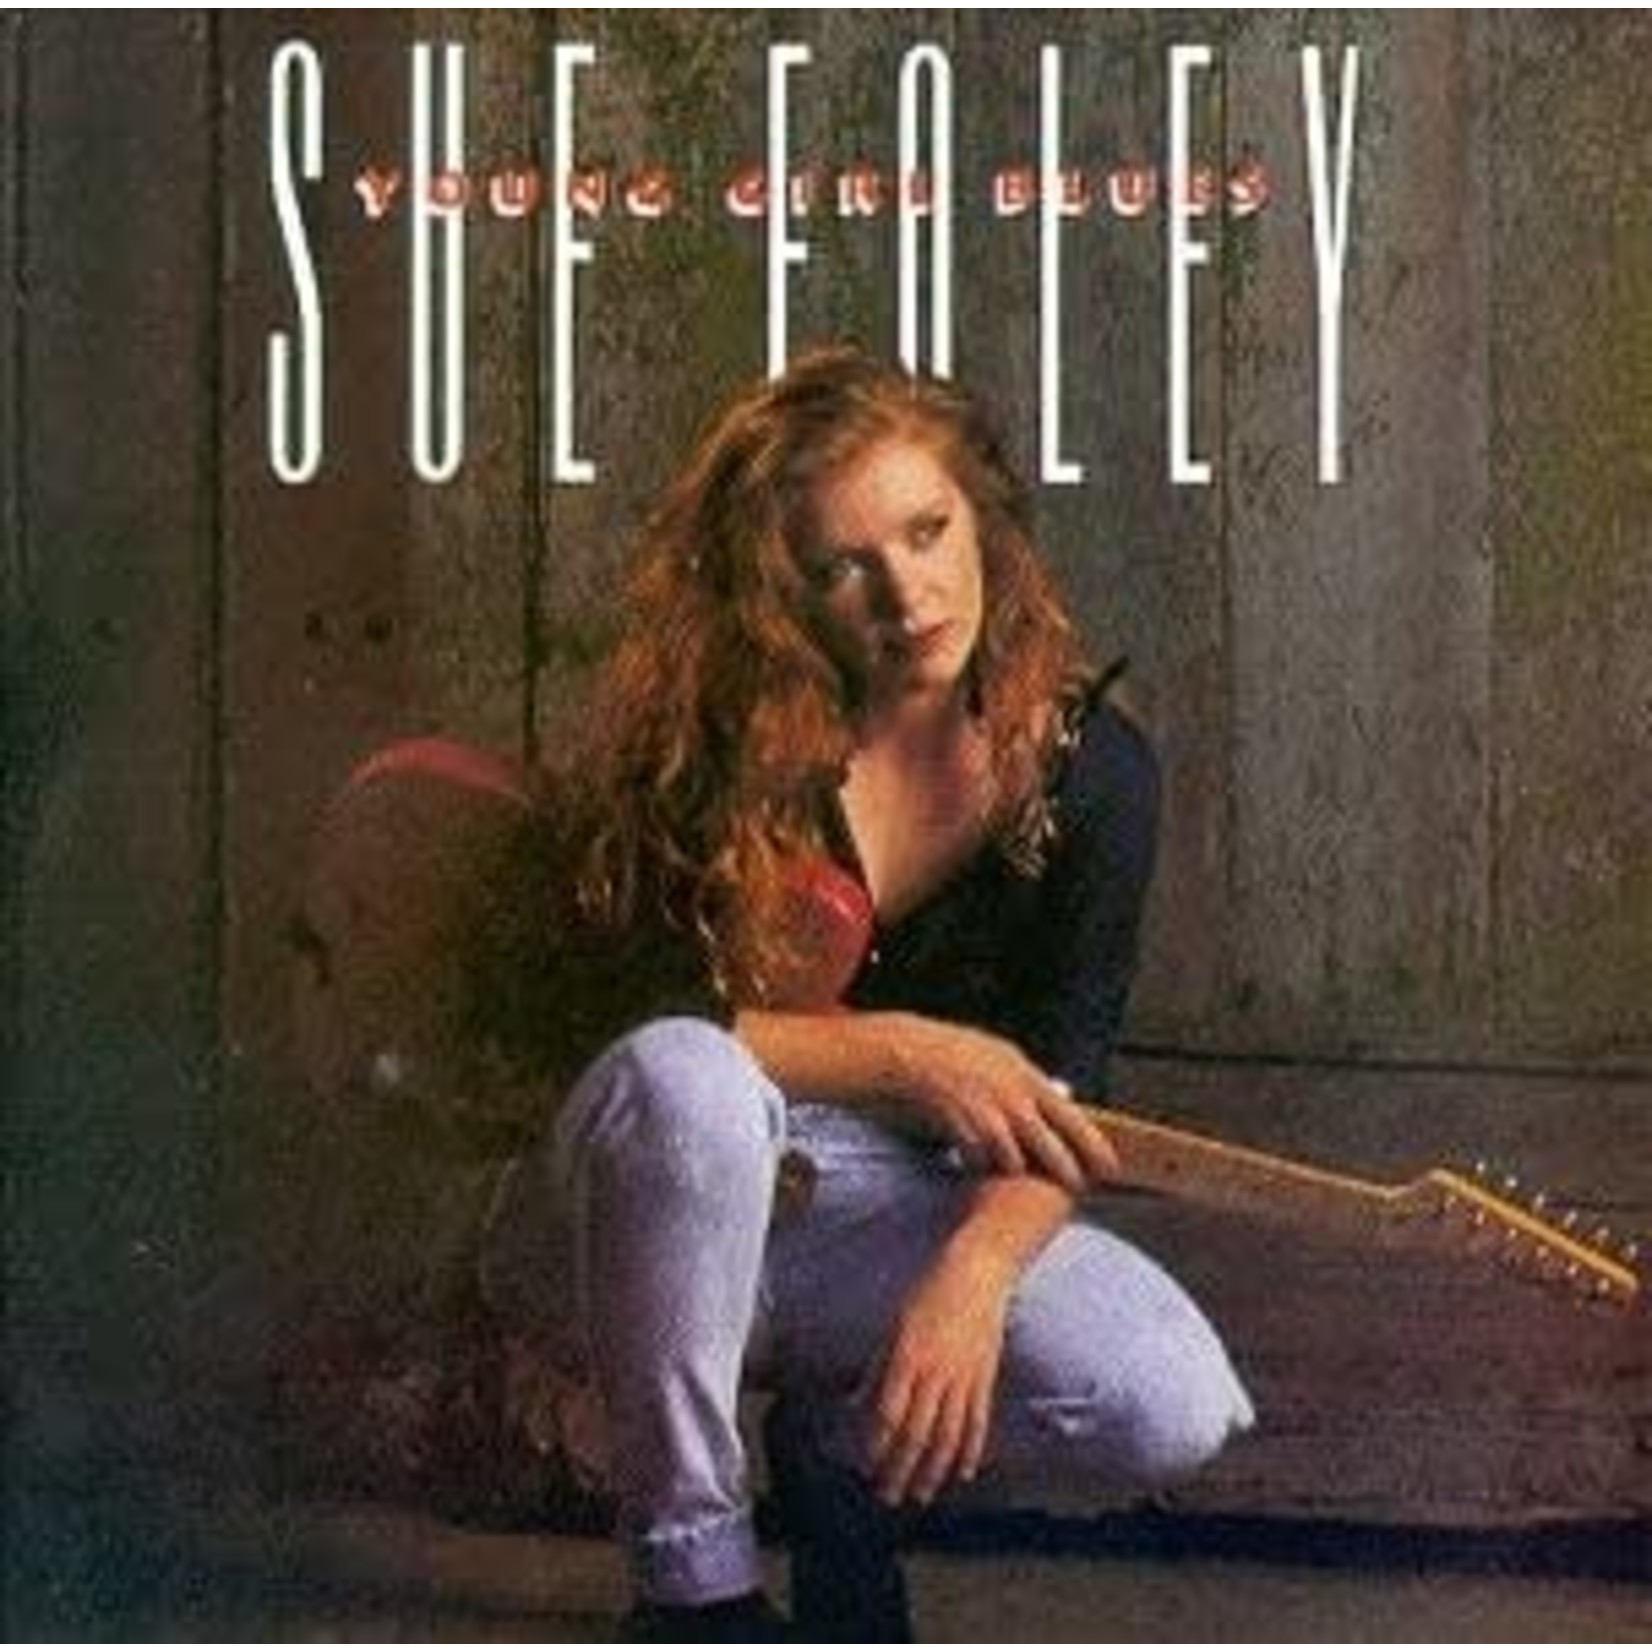 Sue Foley - Young Girl Blues [USED CD]